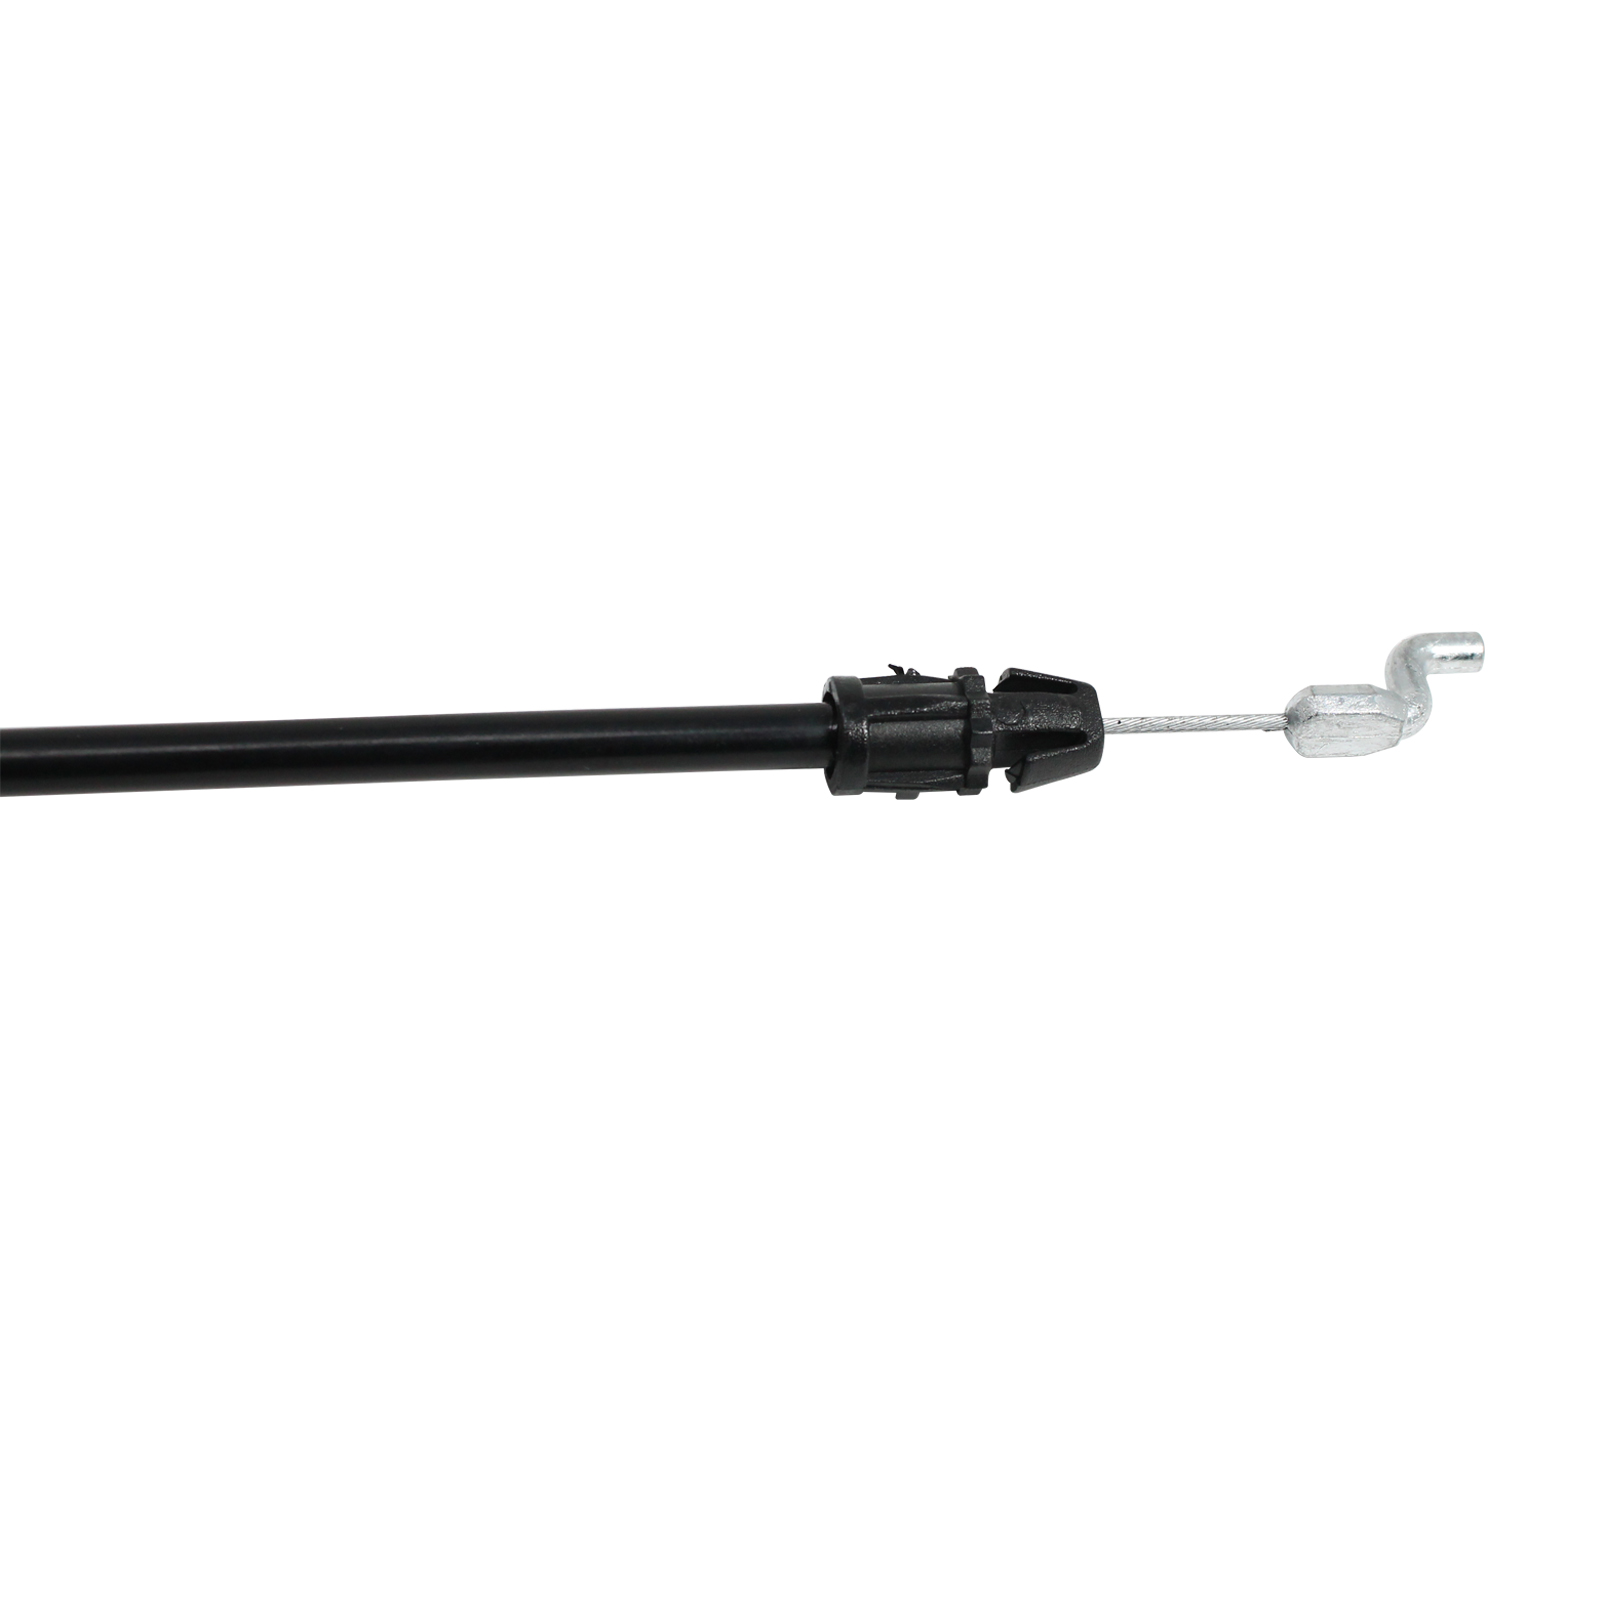 532176556 Engine Cable Replacement for Husqvarna ROTARY LAWN MOWER (96114000703) (2007-04) Lawn Mower: Consumer Walk Behind - Compatible with 176556 162778 Zone Control Cable - image 3 of 4